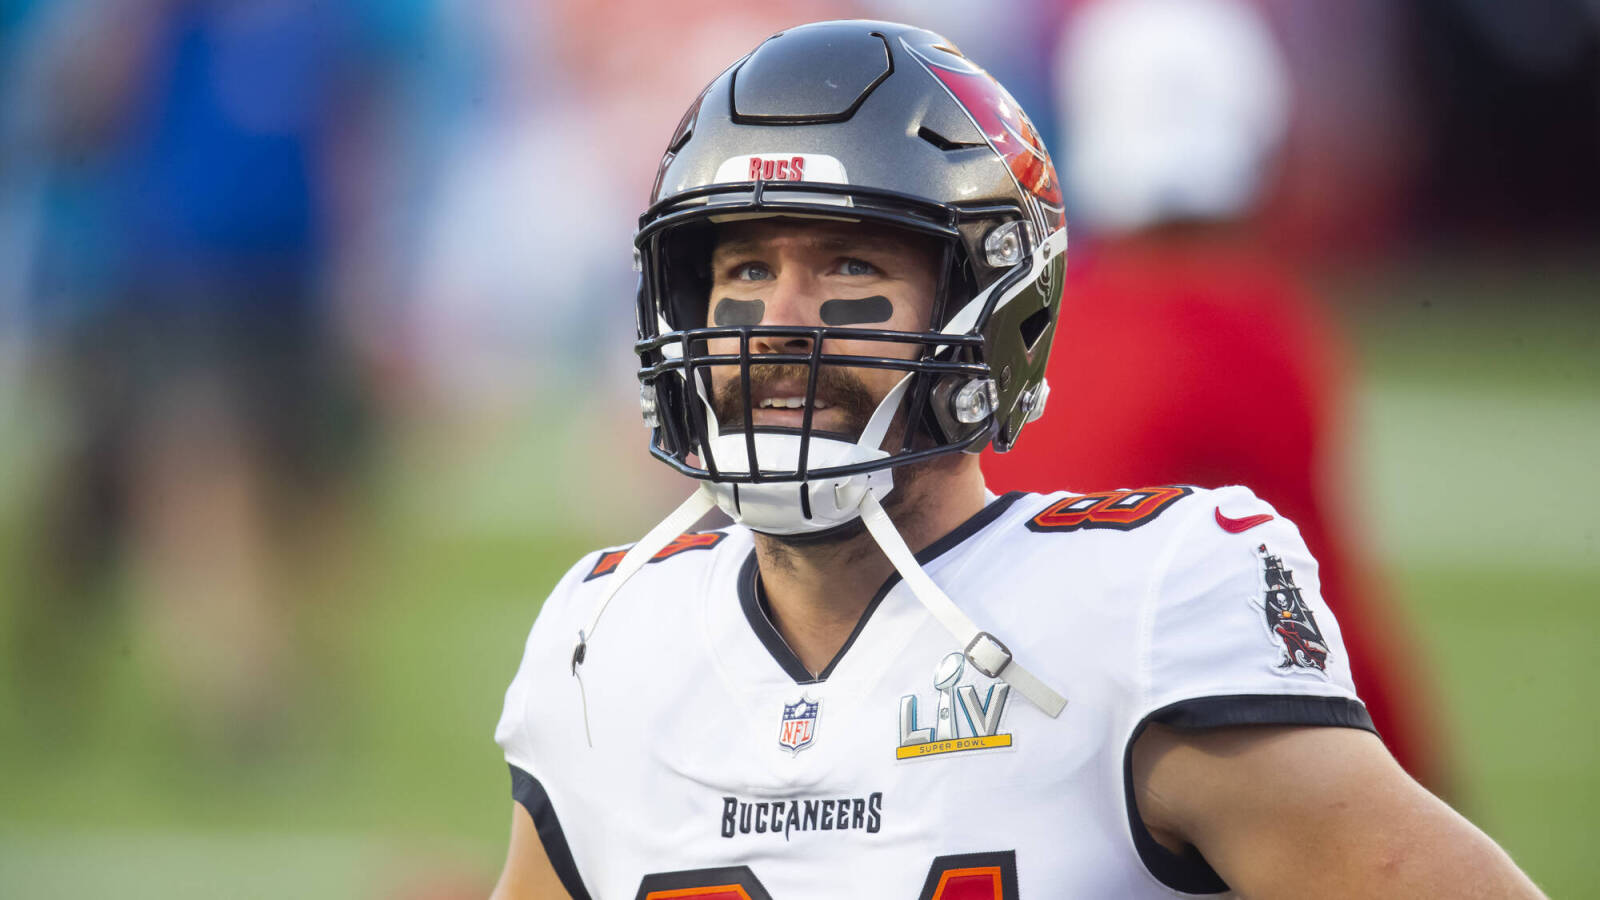 Hall of Fame HC Tony Dungy calls NFL protocol 'broken system' after Cameron Brate concussion